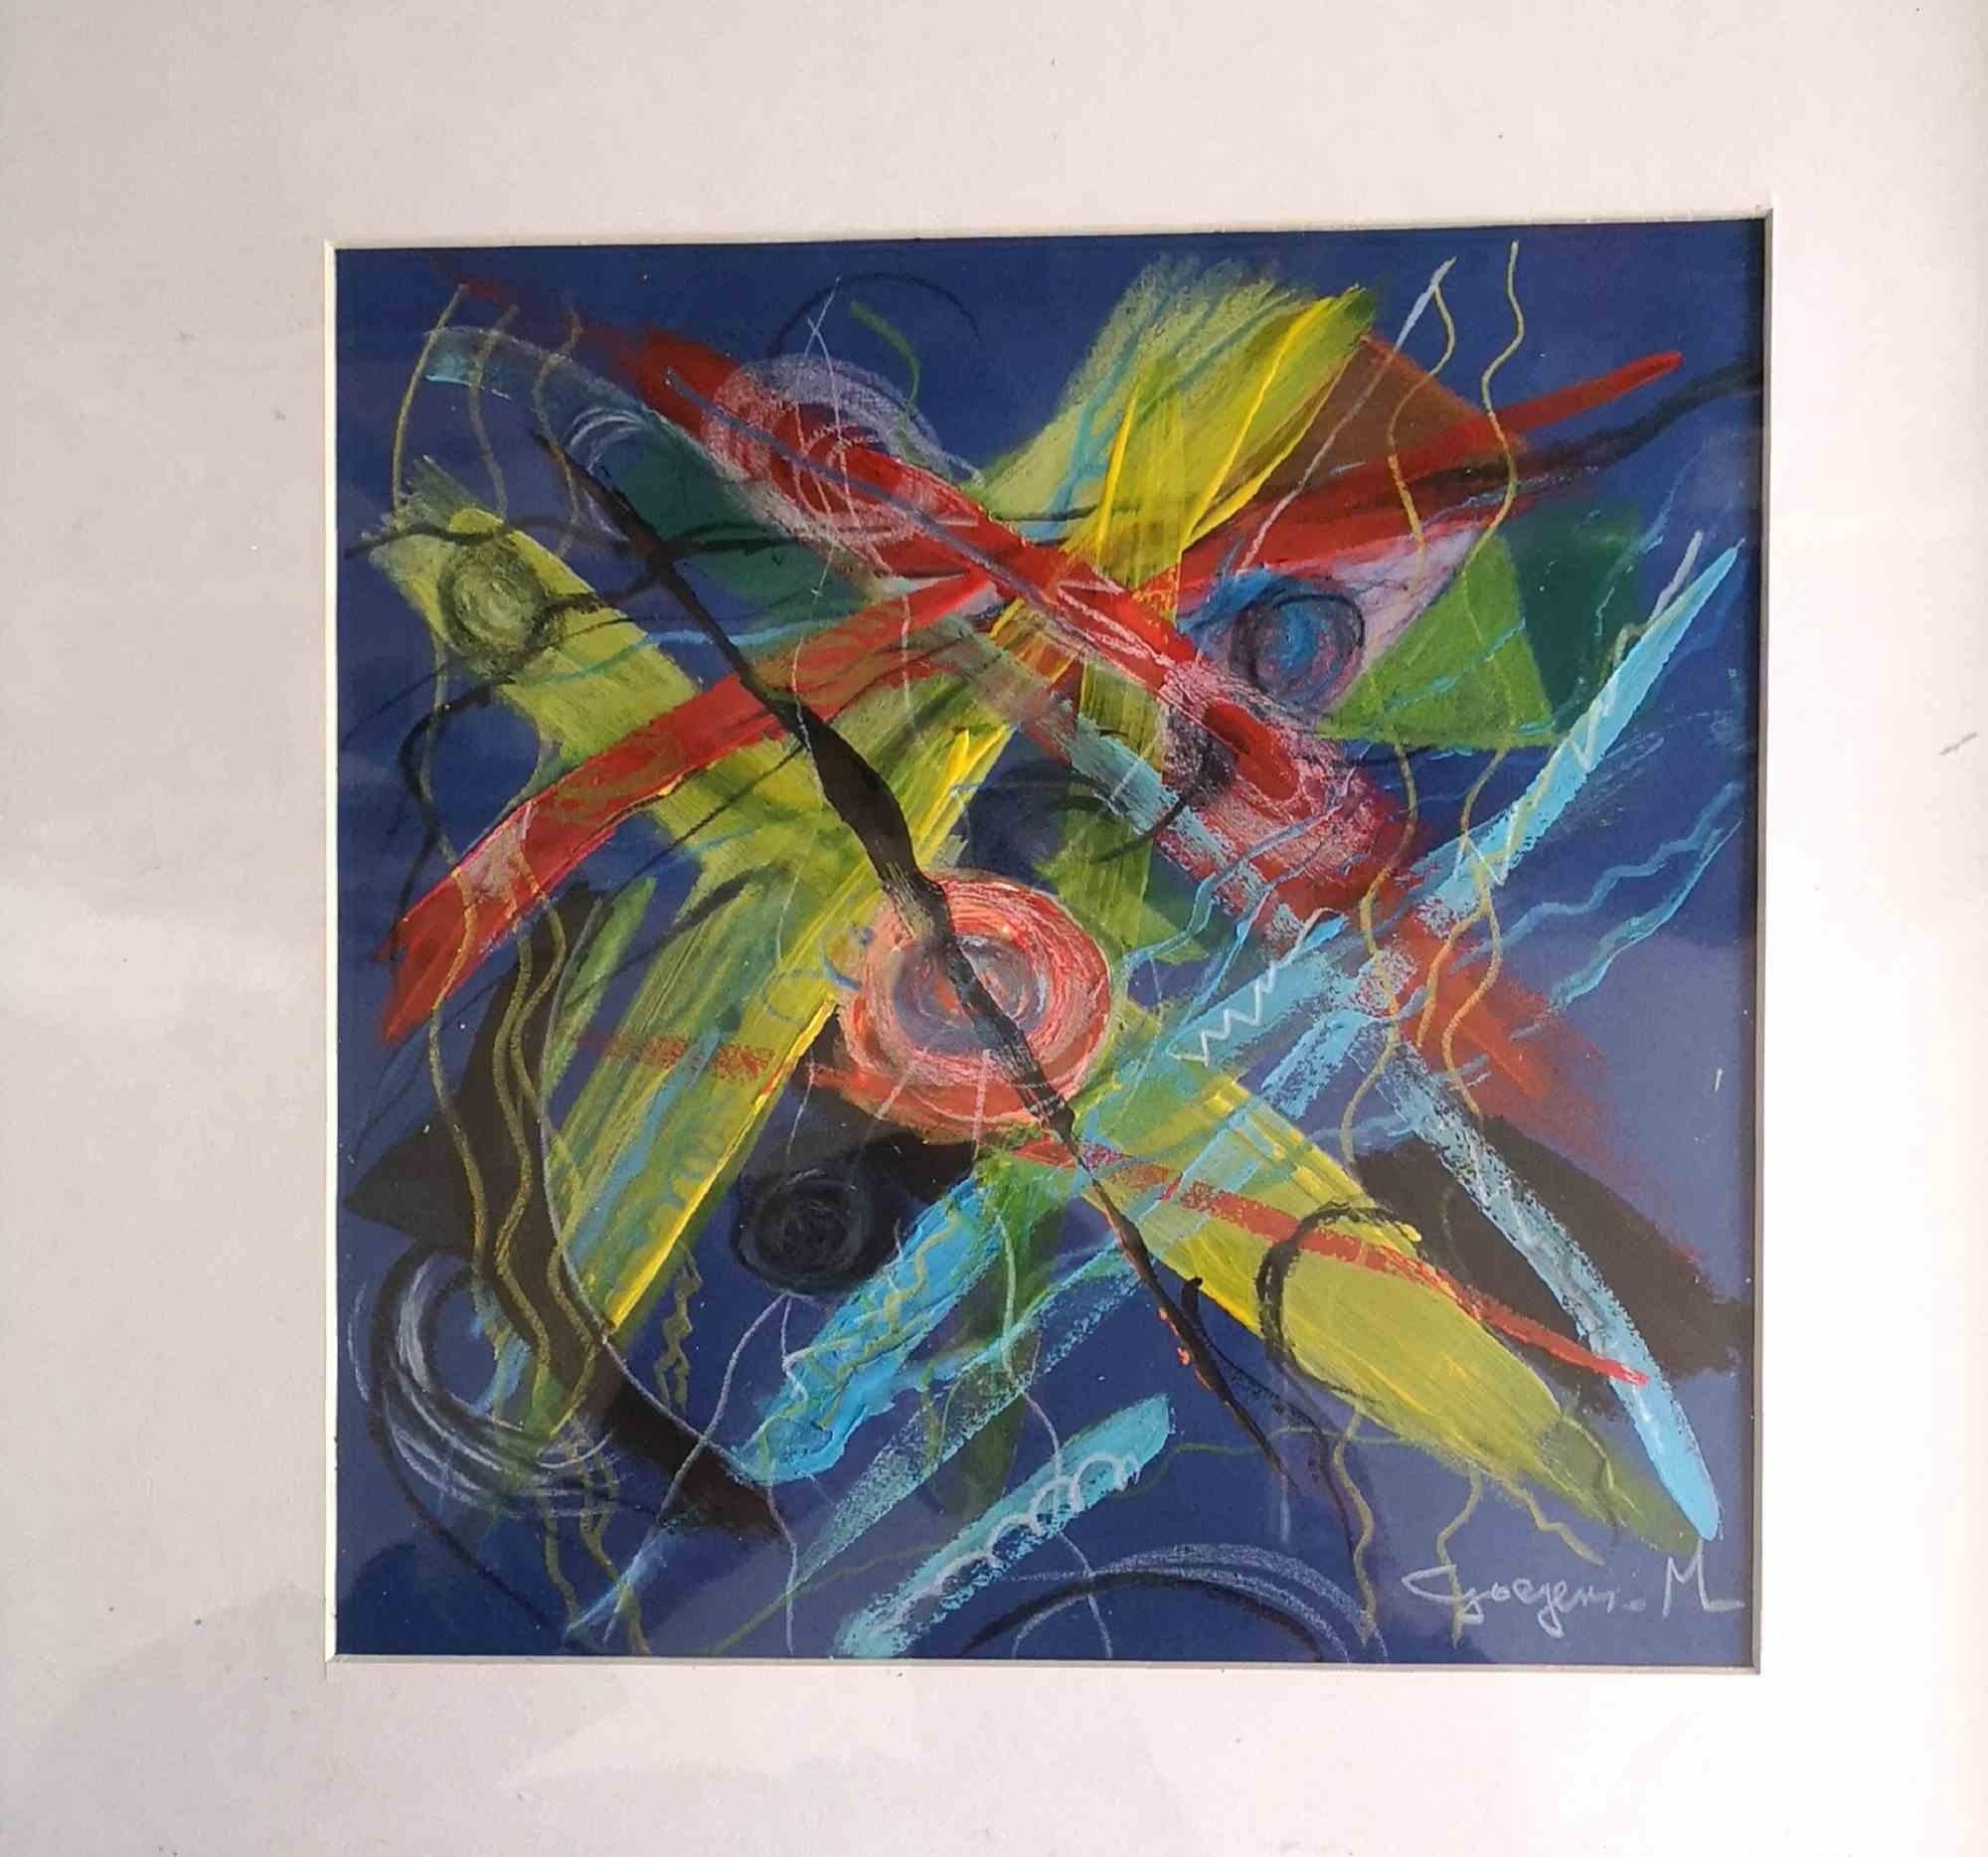 Abstract Composition is a suggestive artwork realized by the Belgian artist  Martine Goeyens  in 2020

Acrylic on cardboard. 

Hand signed on the lower right margin.

The artwork is a fascinating and suggestive representation of an abstract